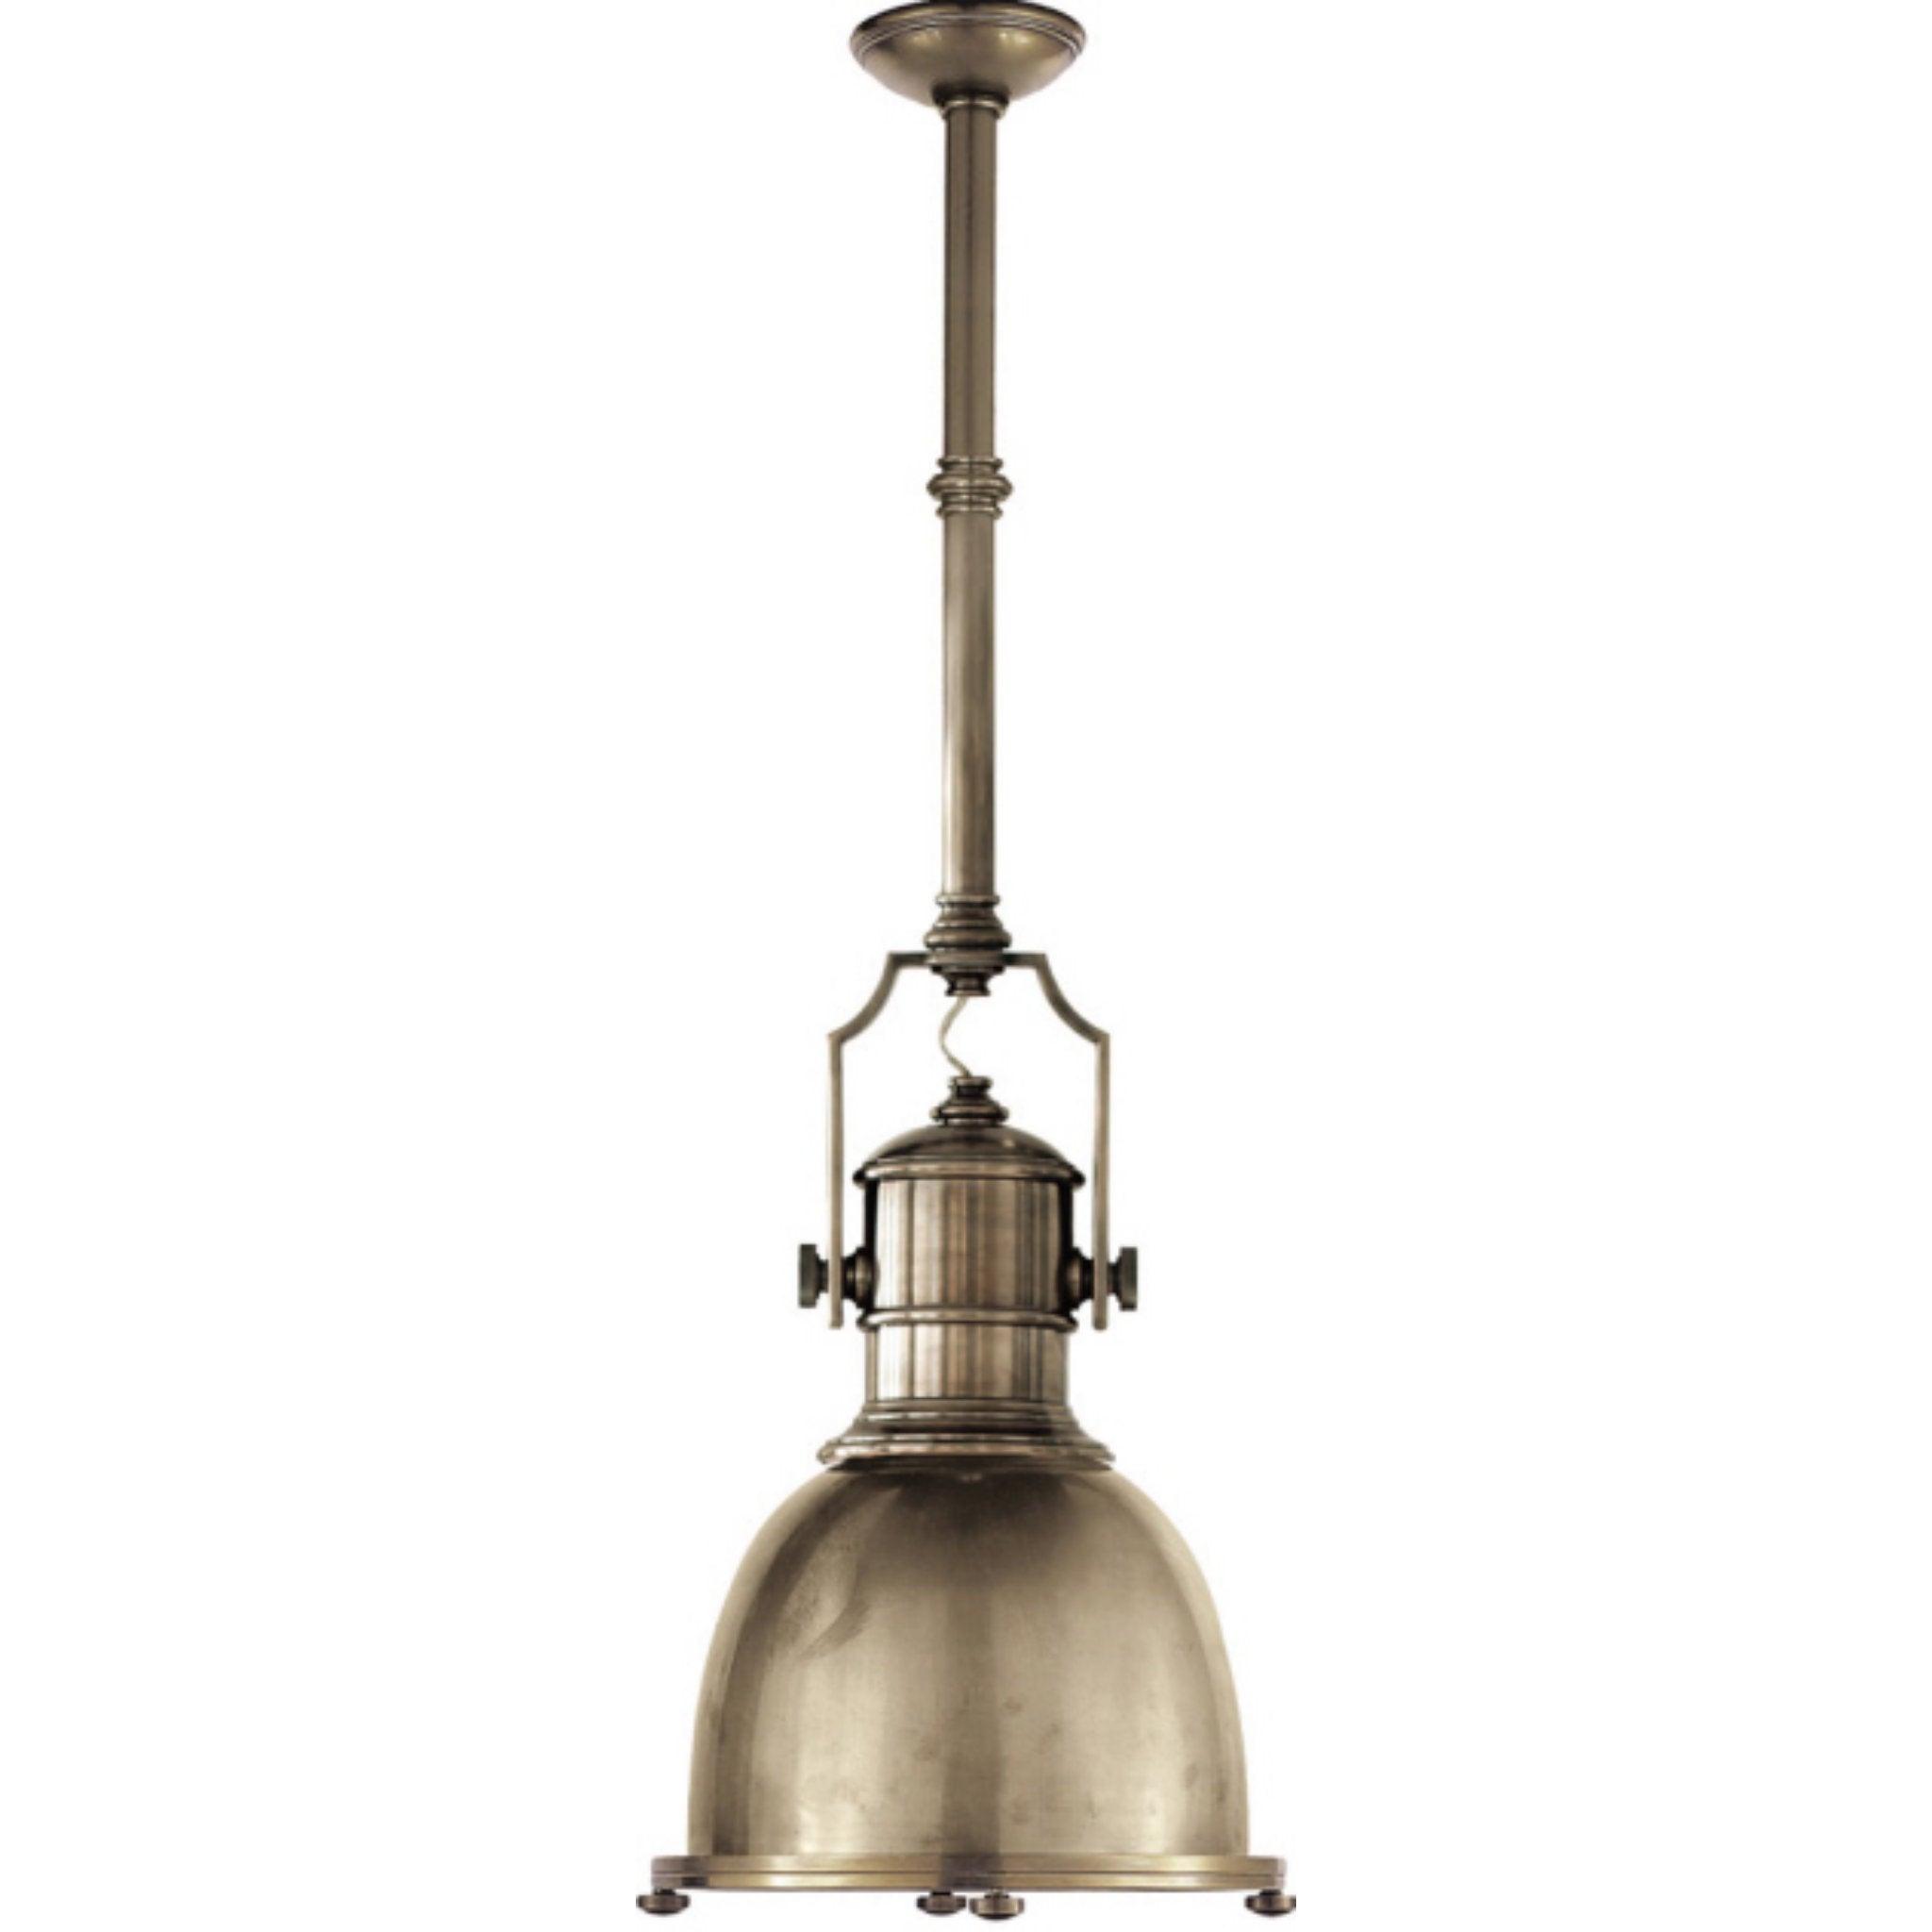 Chapman & Myers Country Industrial Small Pendant in Antique Nickel with Antique Nickel Shade